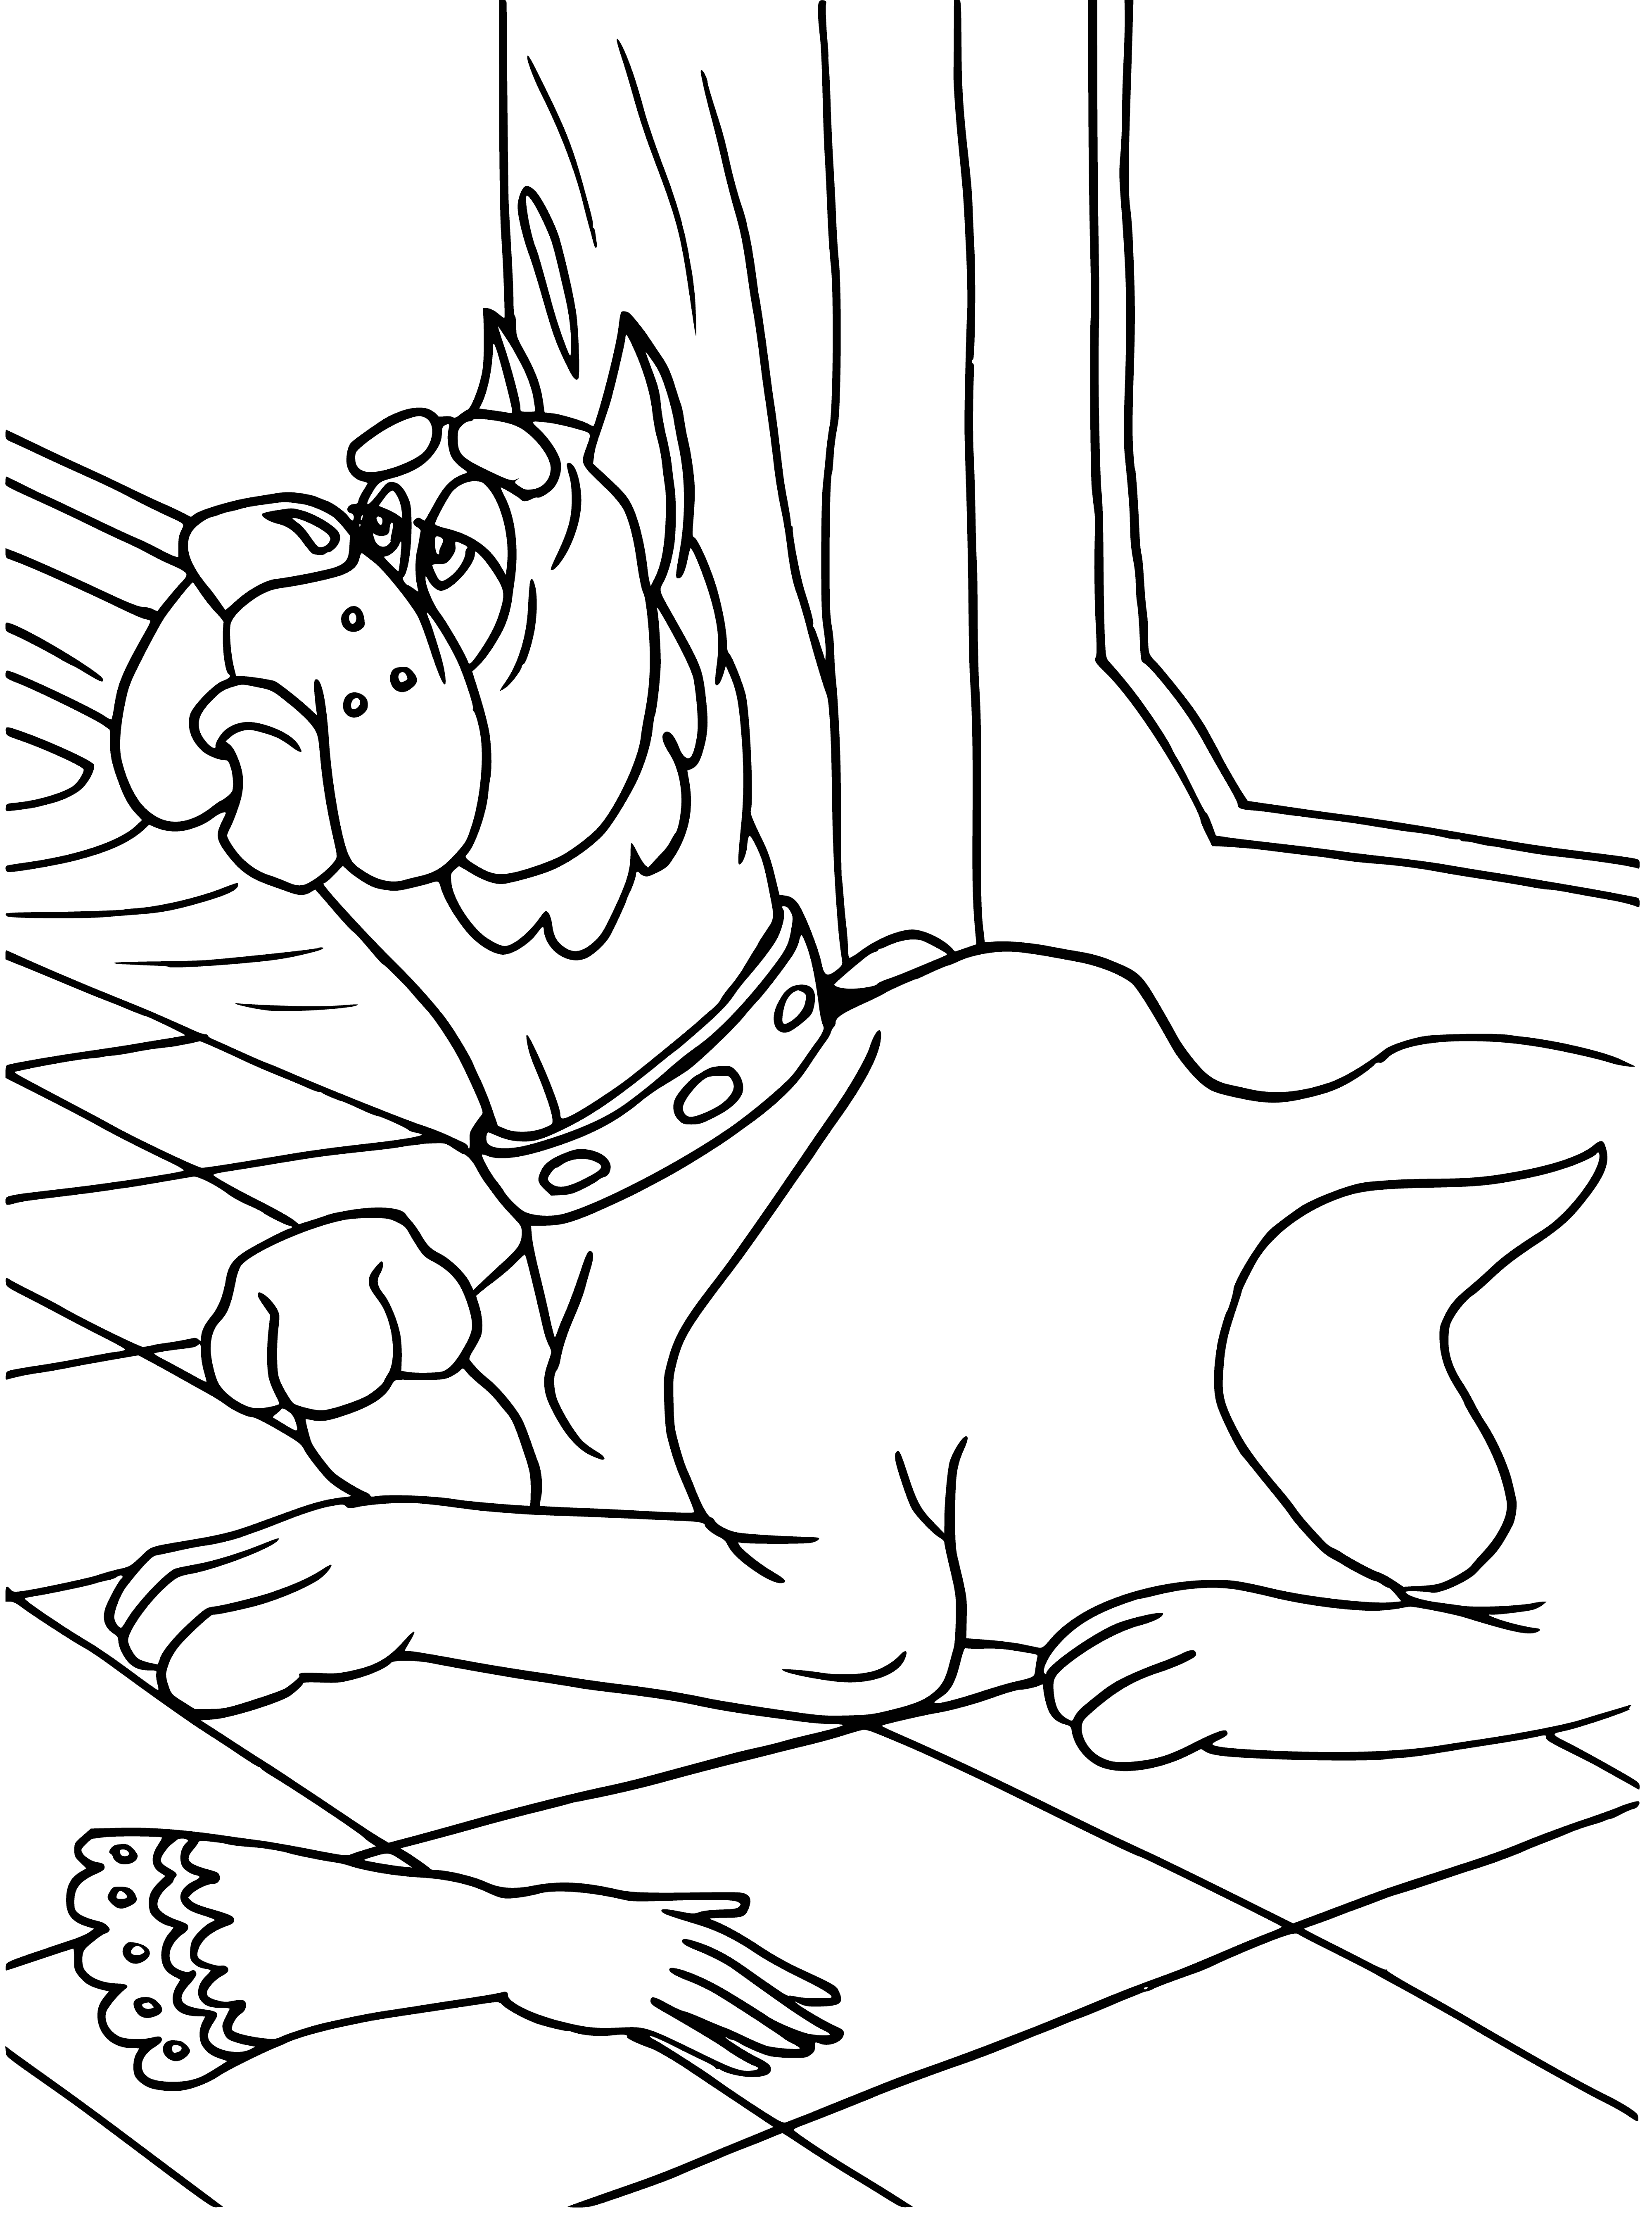 coloring page: Tan & white dog with paw on red pillow wearing green w/ gold tag & B. Behind is green & gold shield. #dog #shield #pillow #collar